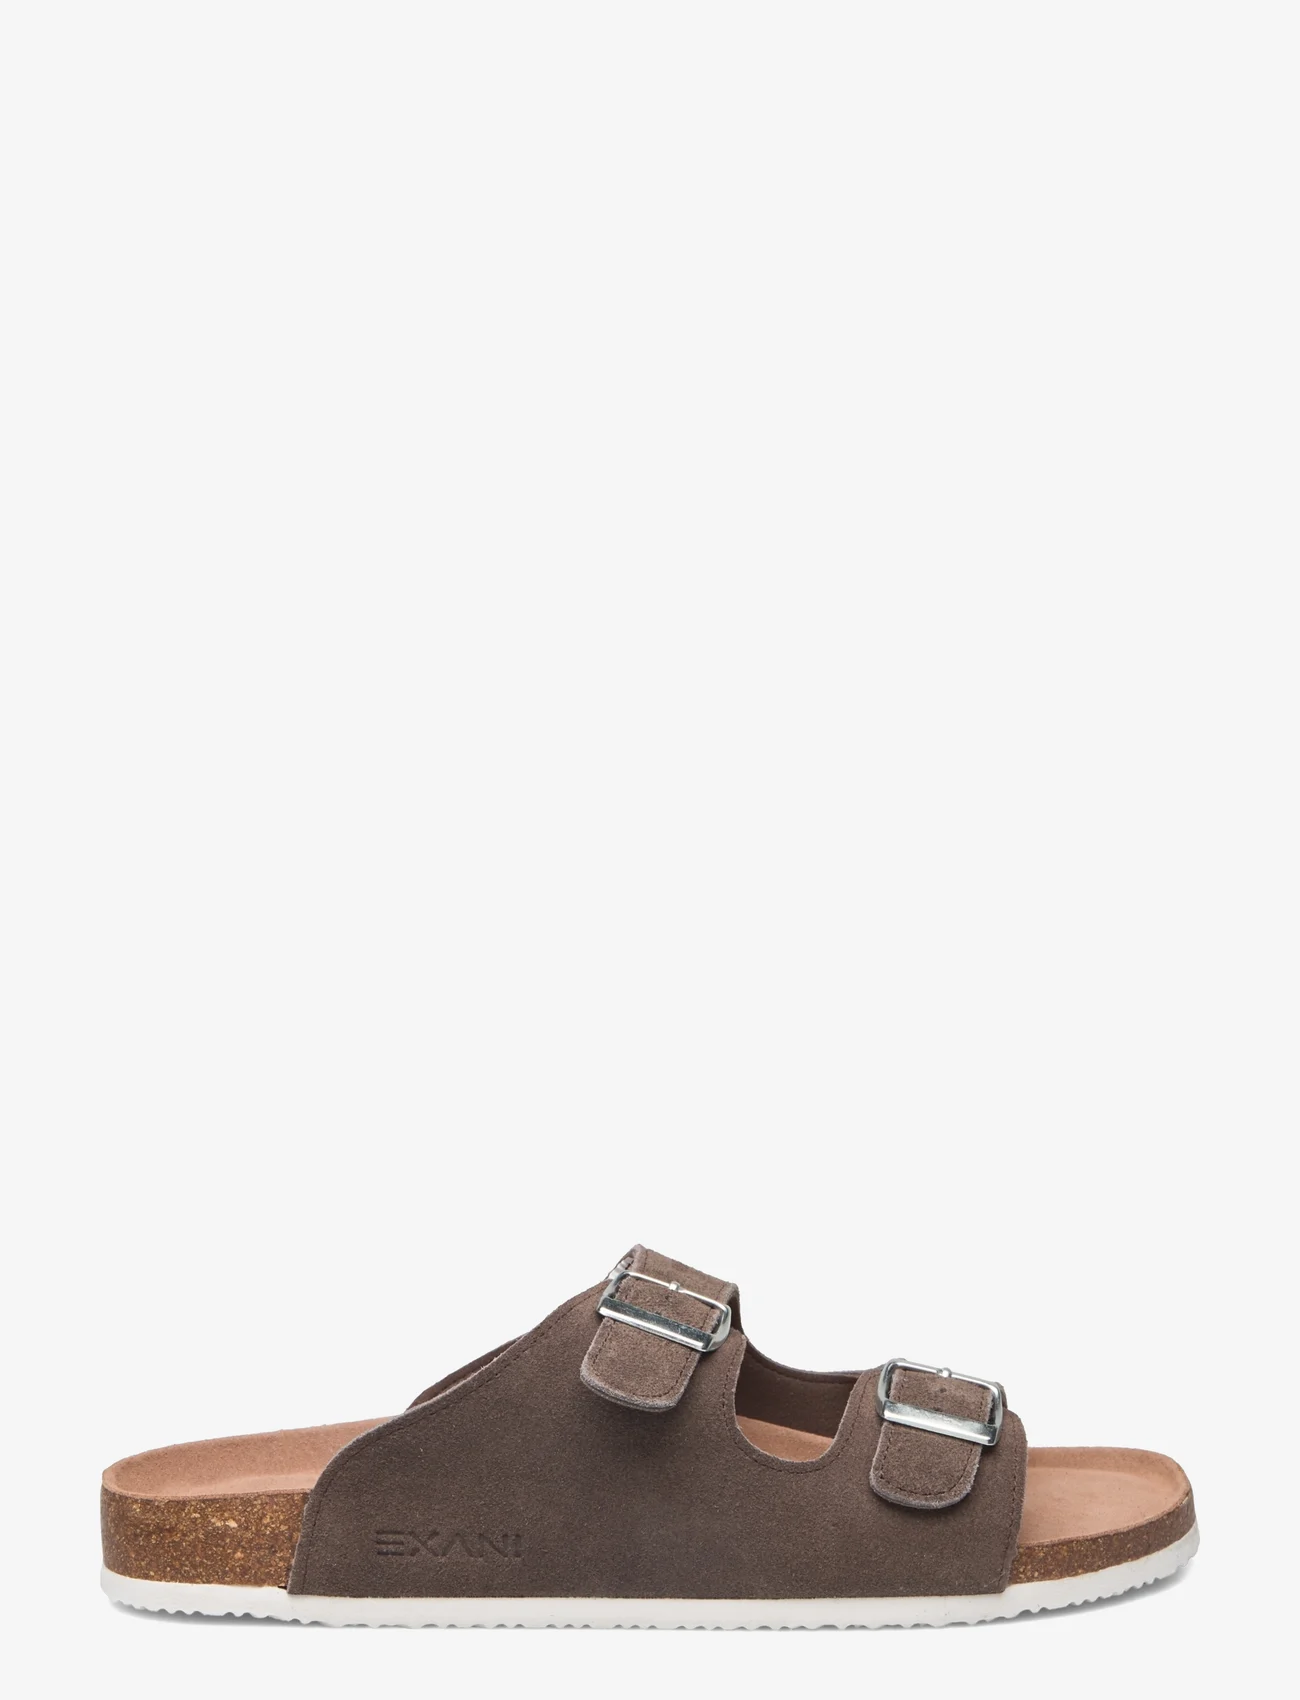 Exani - SPECTRA SUEDE M - sandales - brown - 1